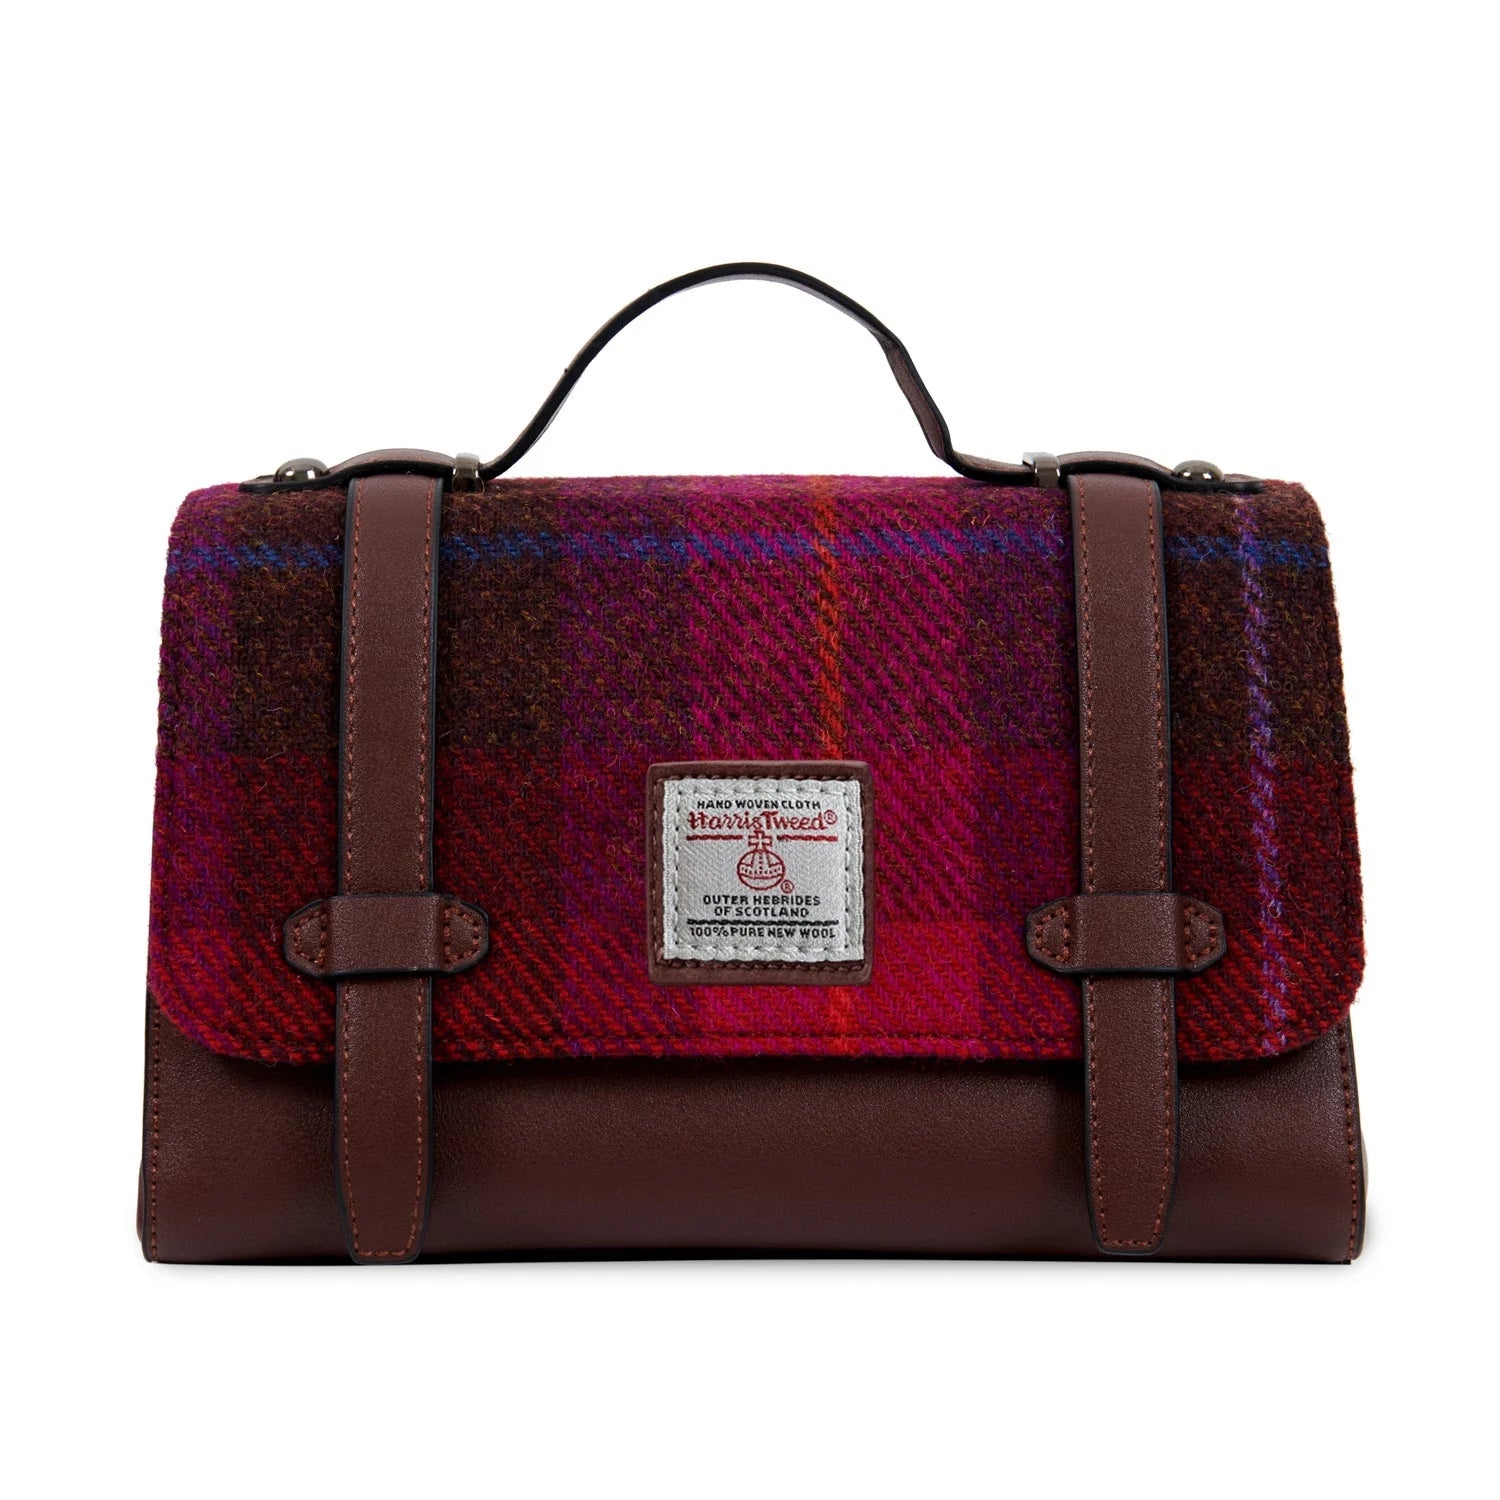 The Orkney Satchel